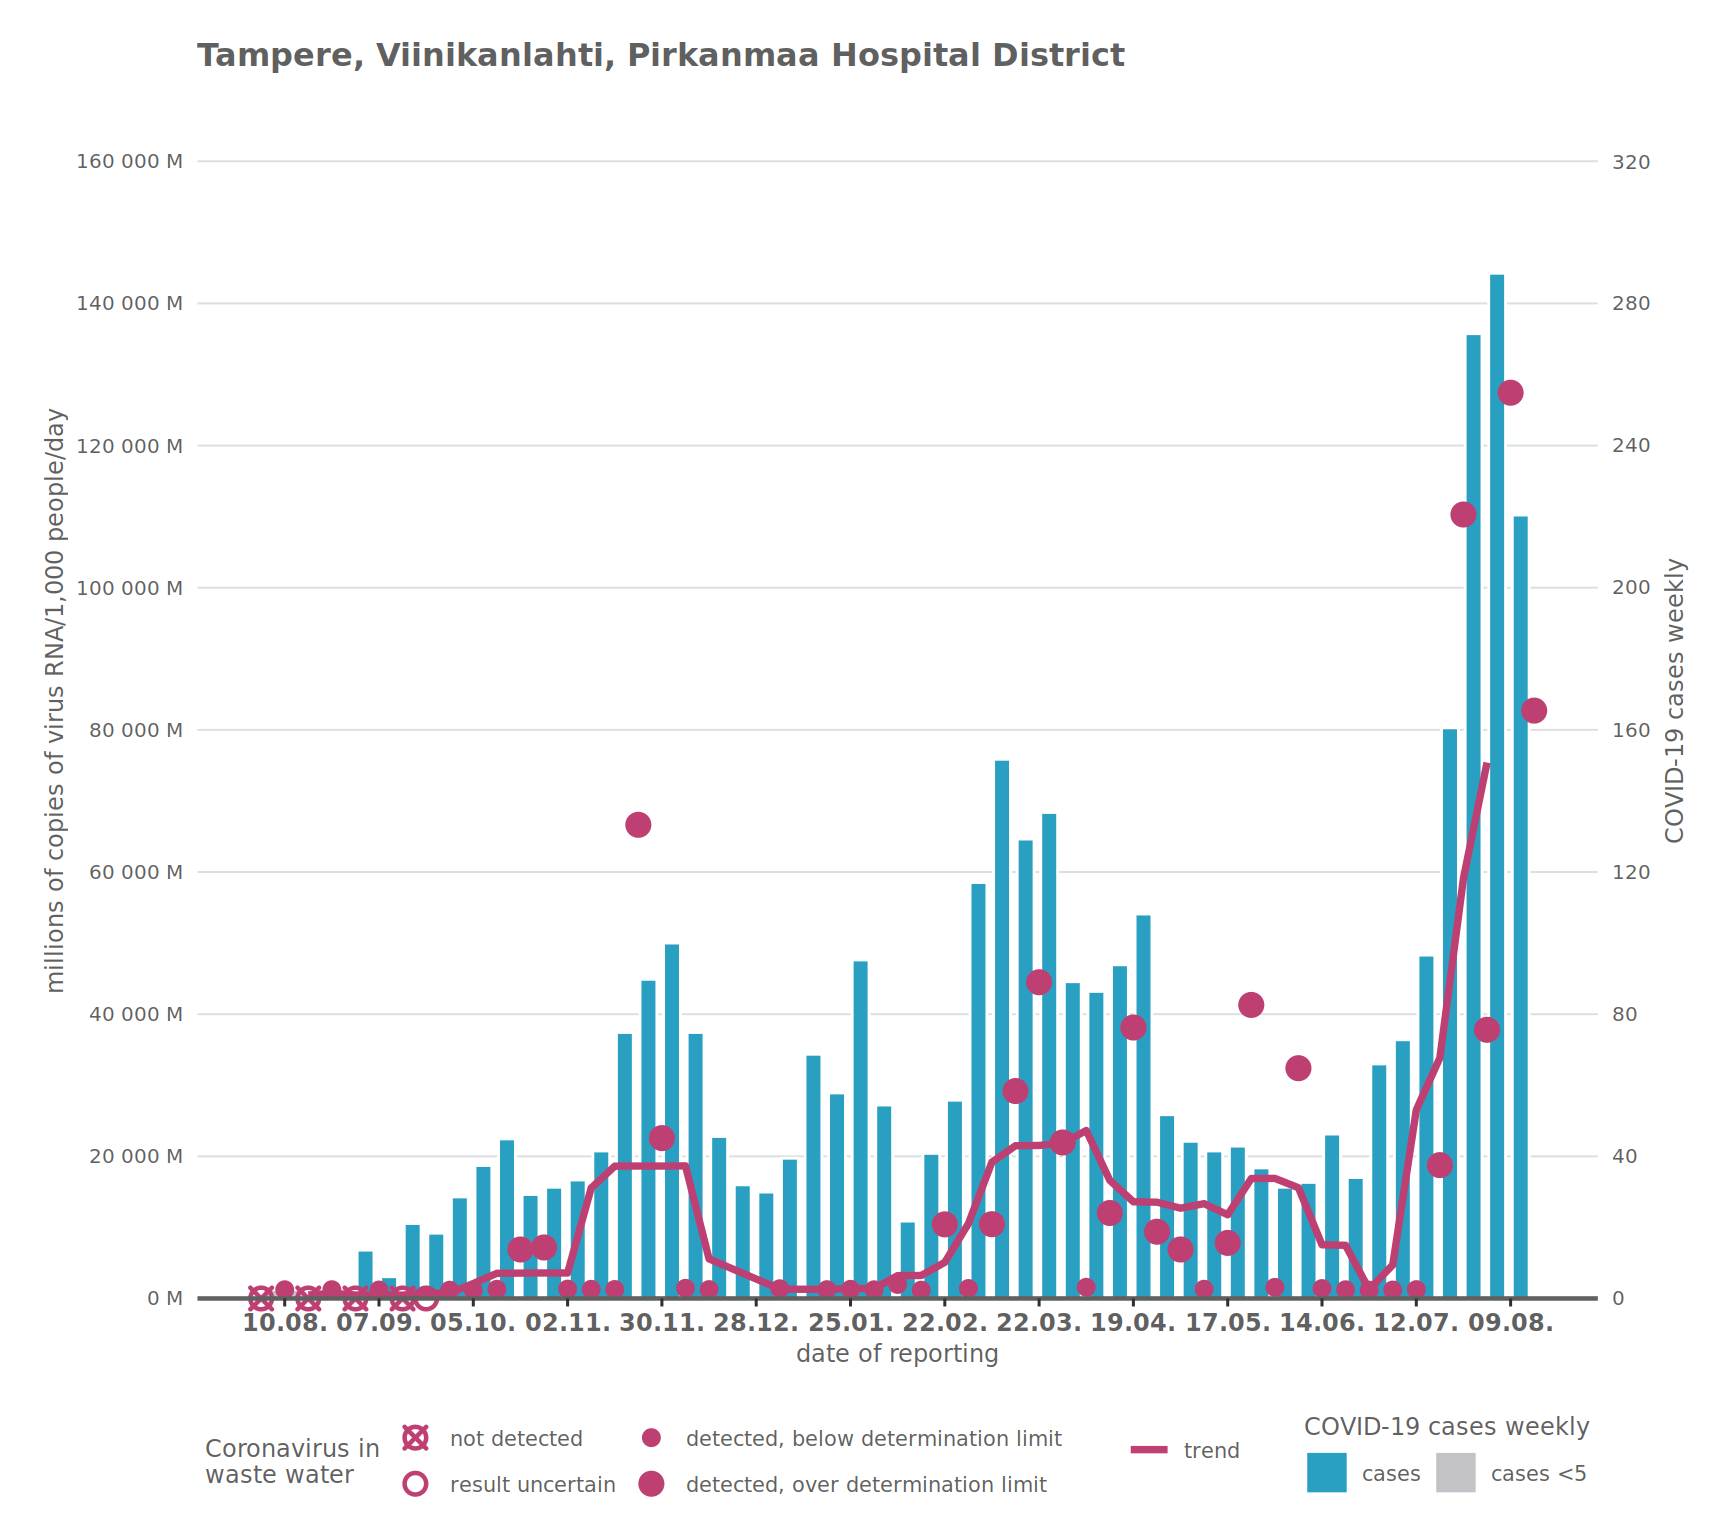 Results of Tampere wastewater monitoring and numbers of infections per week from August 2020 onwards.